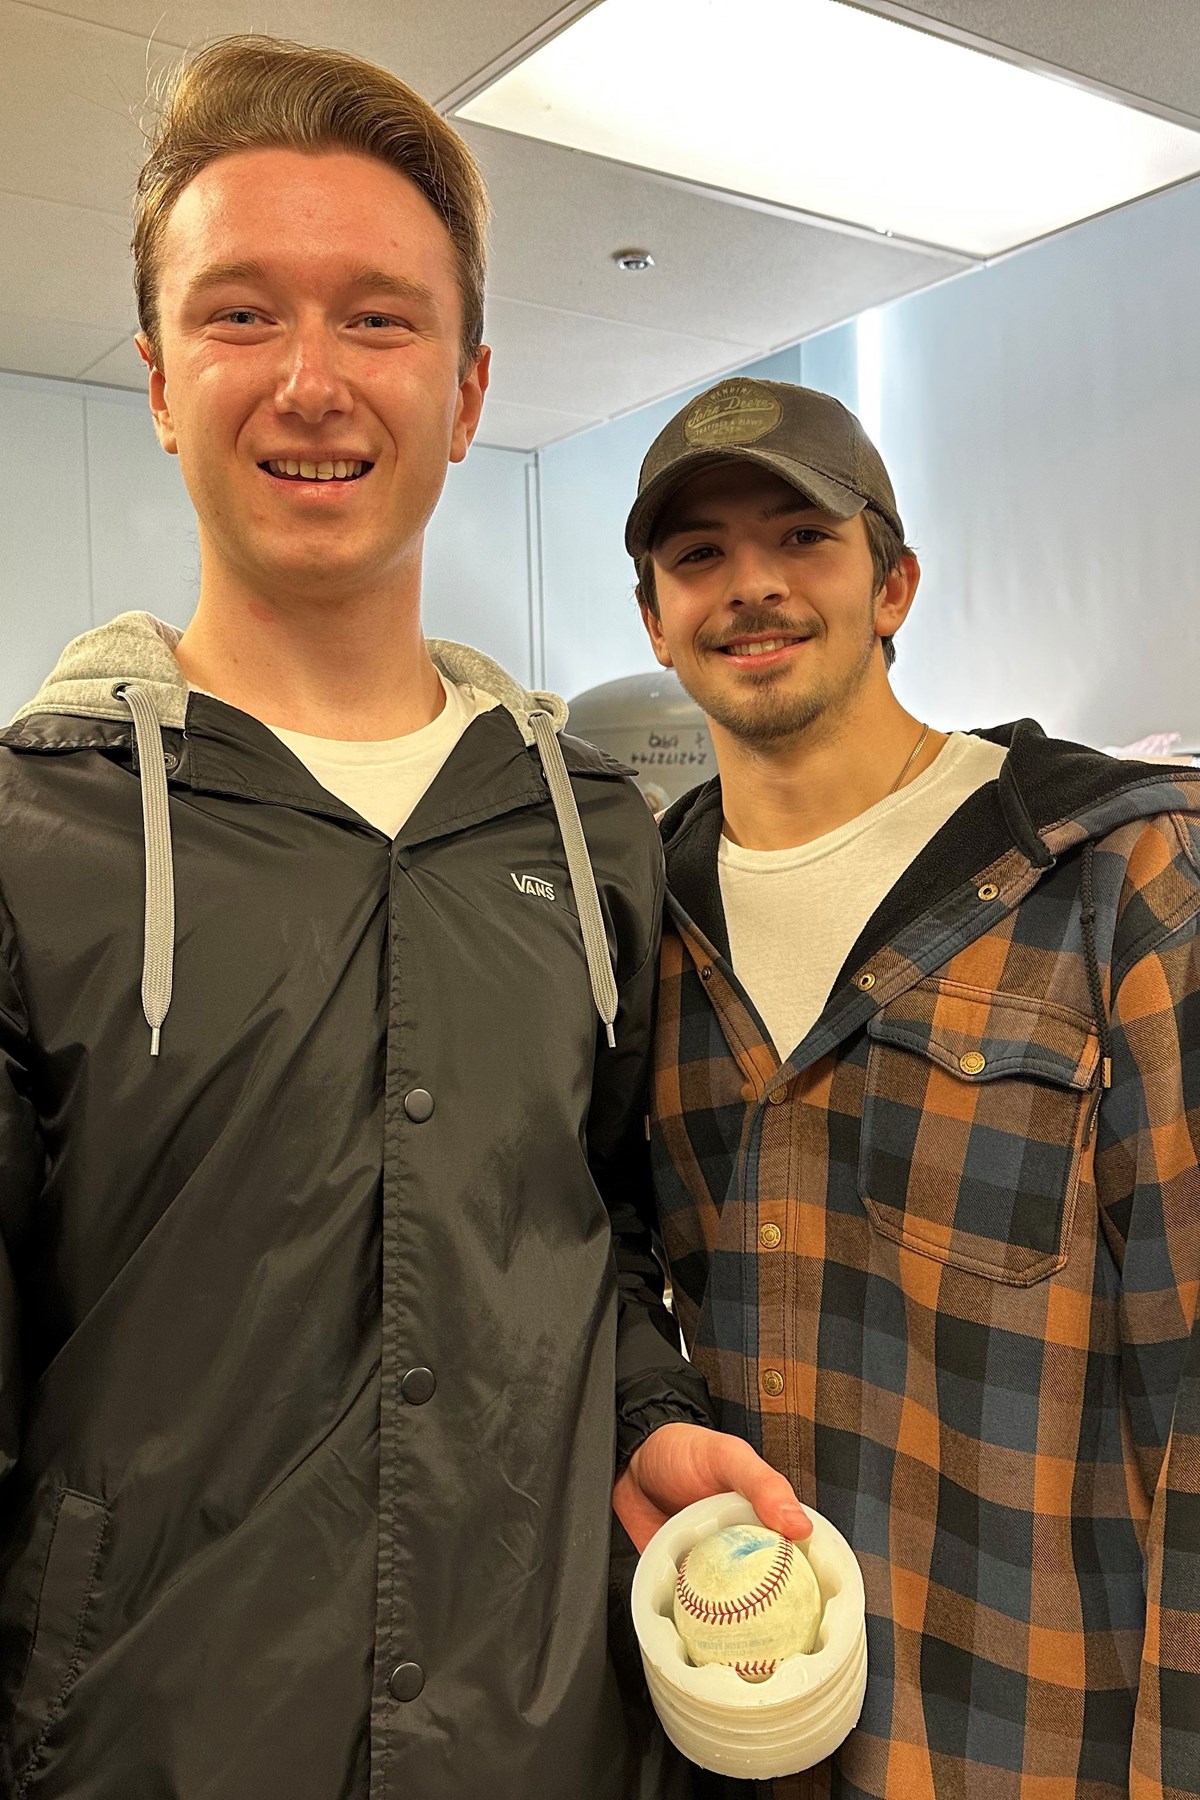 Mechanical engineering majors Ryan Donnelly and Kevin Clougherty standing together in class holding a baseball.